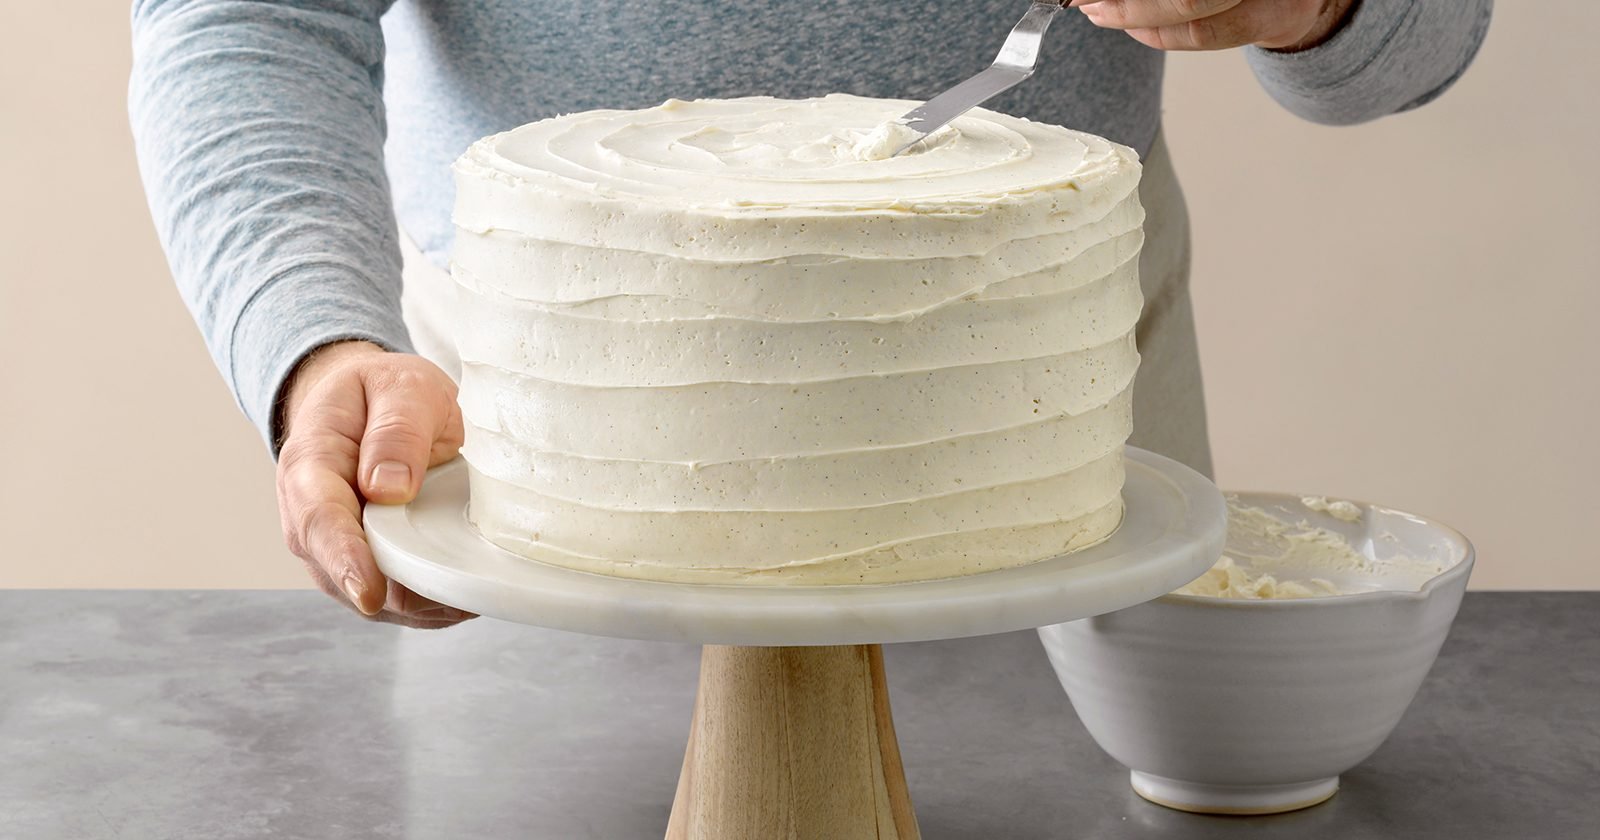 5 Types of Buttercream to Frost Your Cake